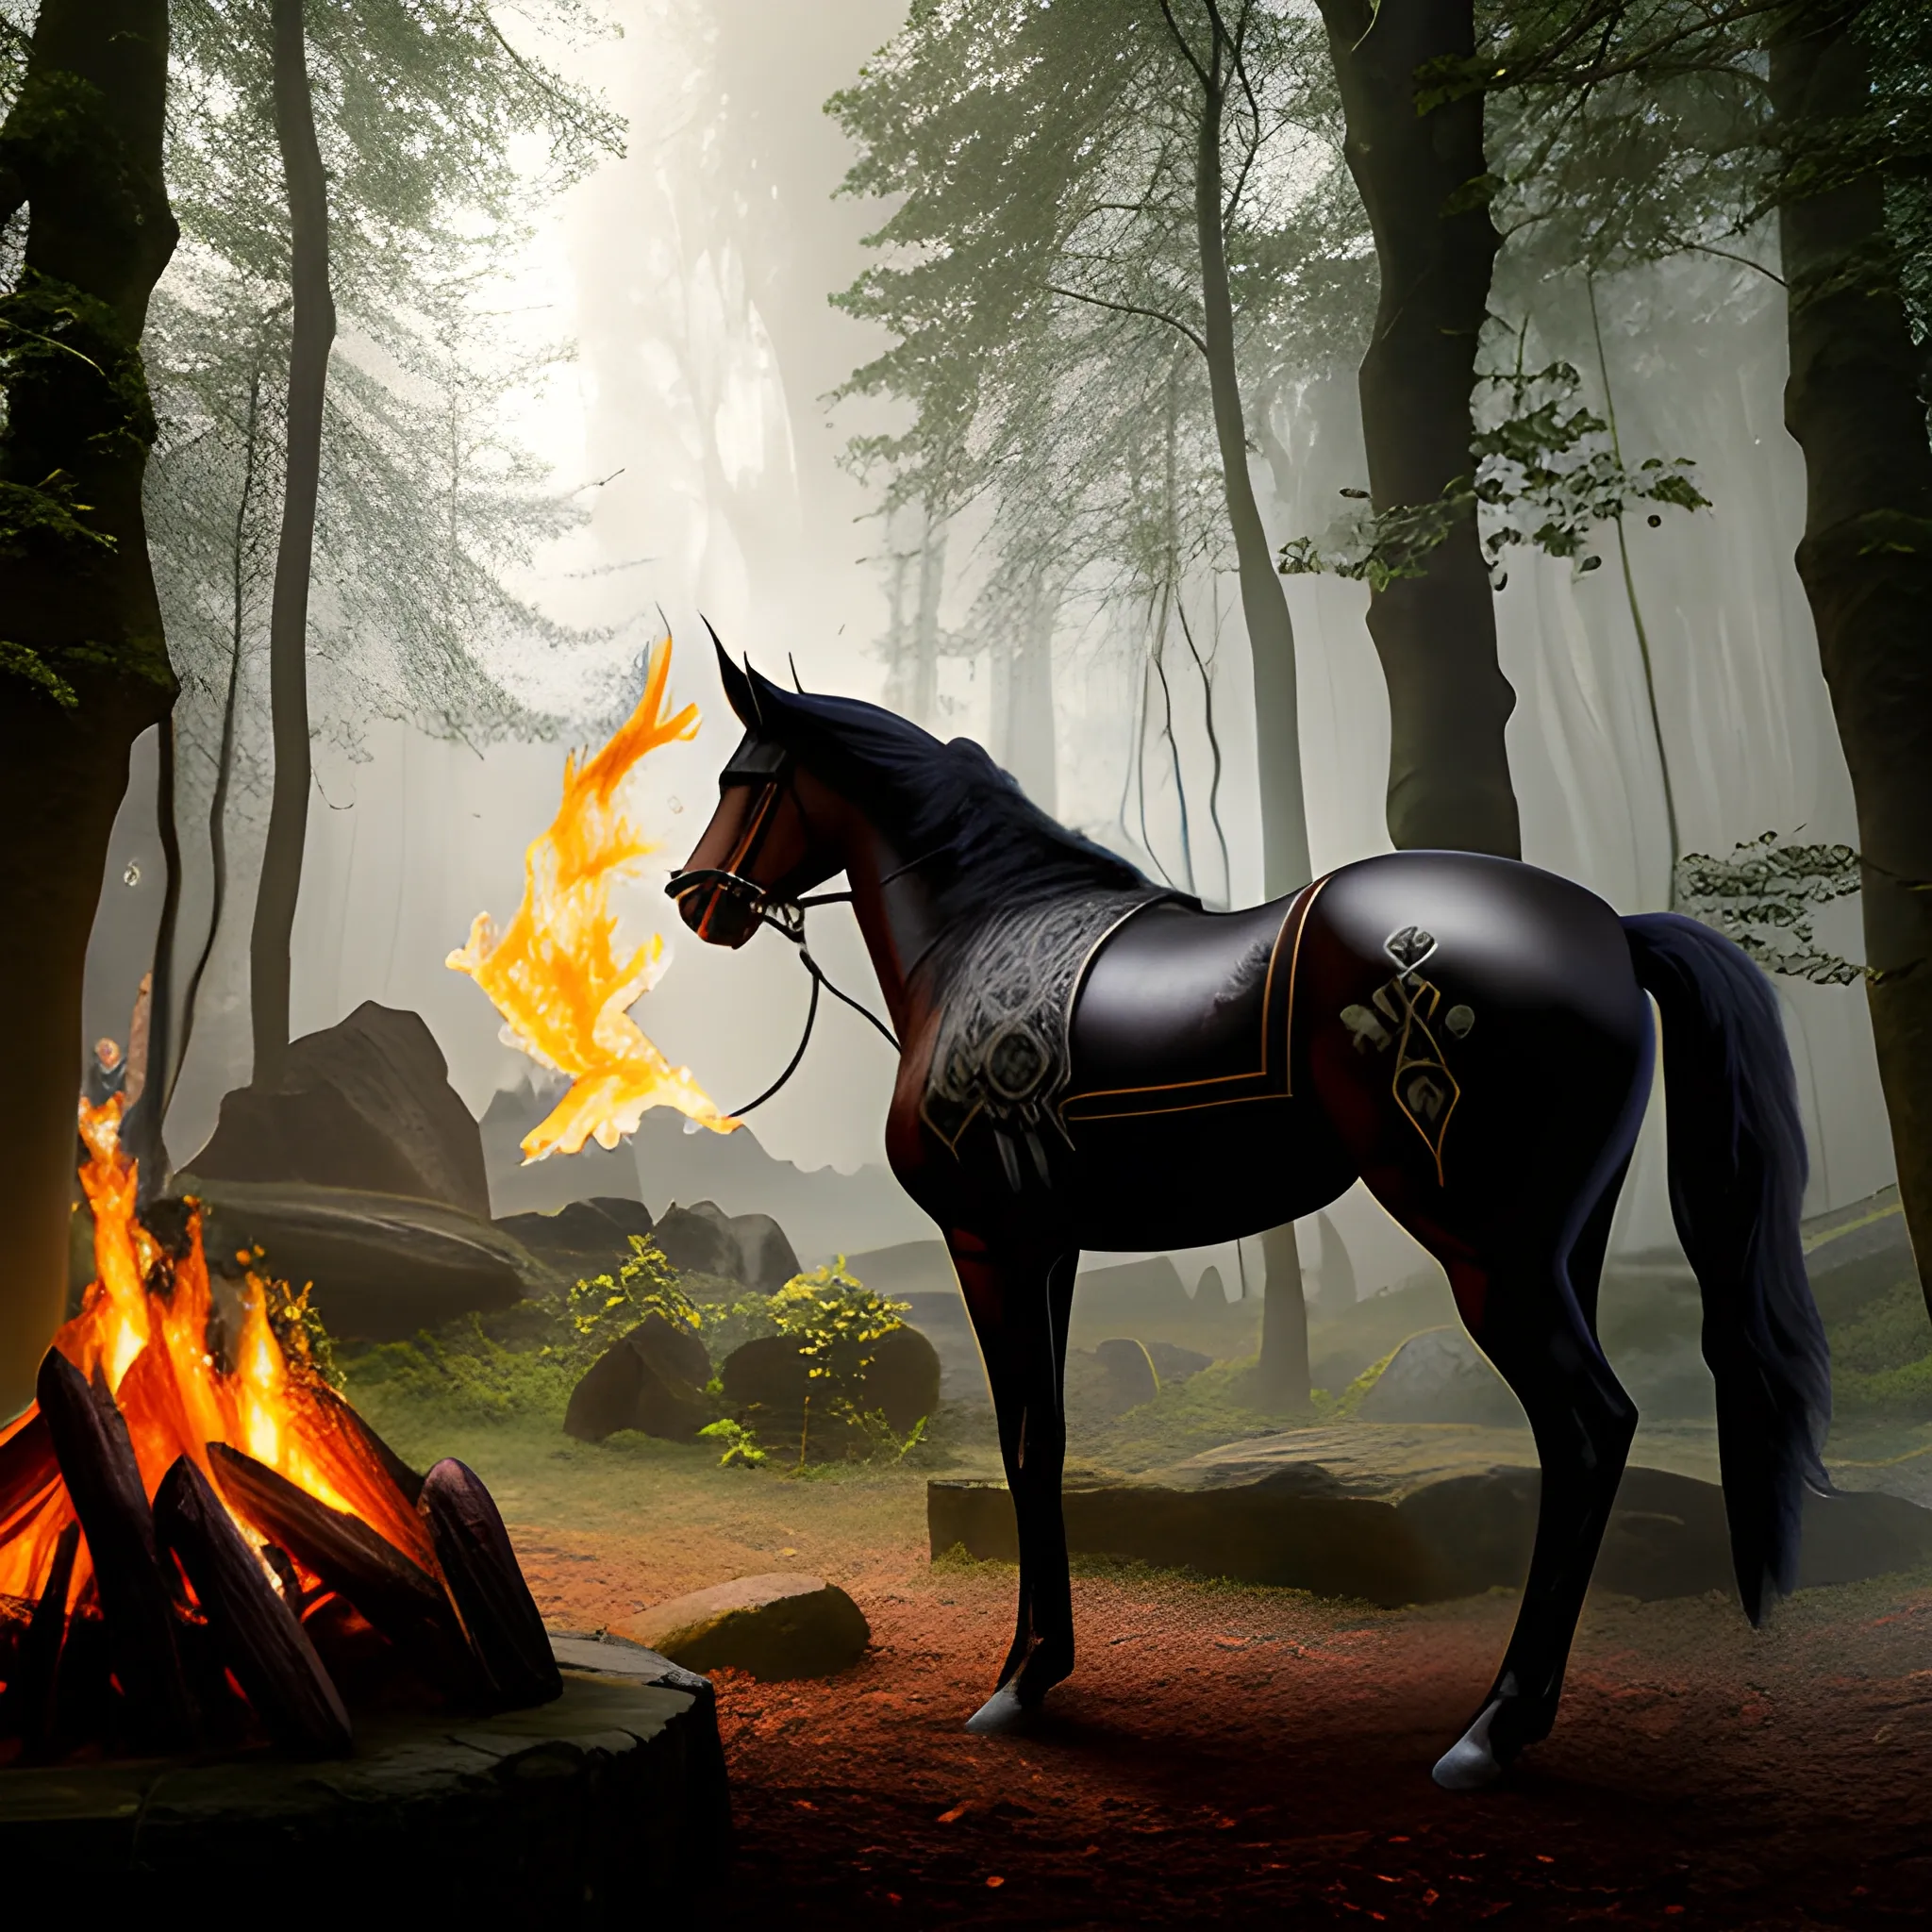 ancient elvish forest with a small man made fire in a clearing, two fur bedrolls, a black stallion with a white intricately designed elvish saddle